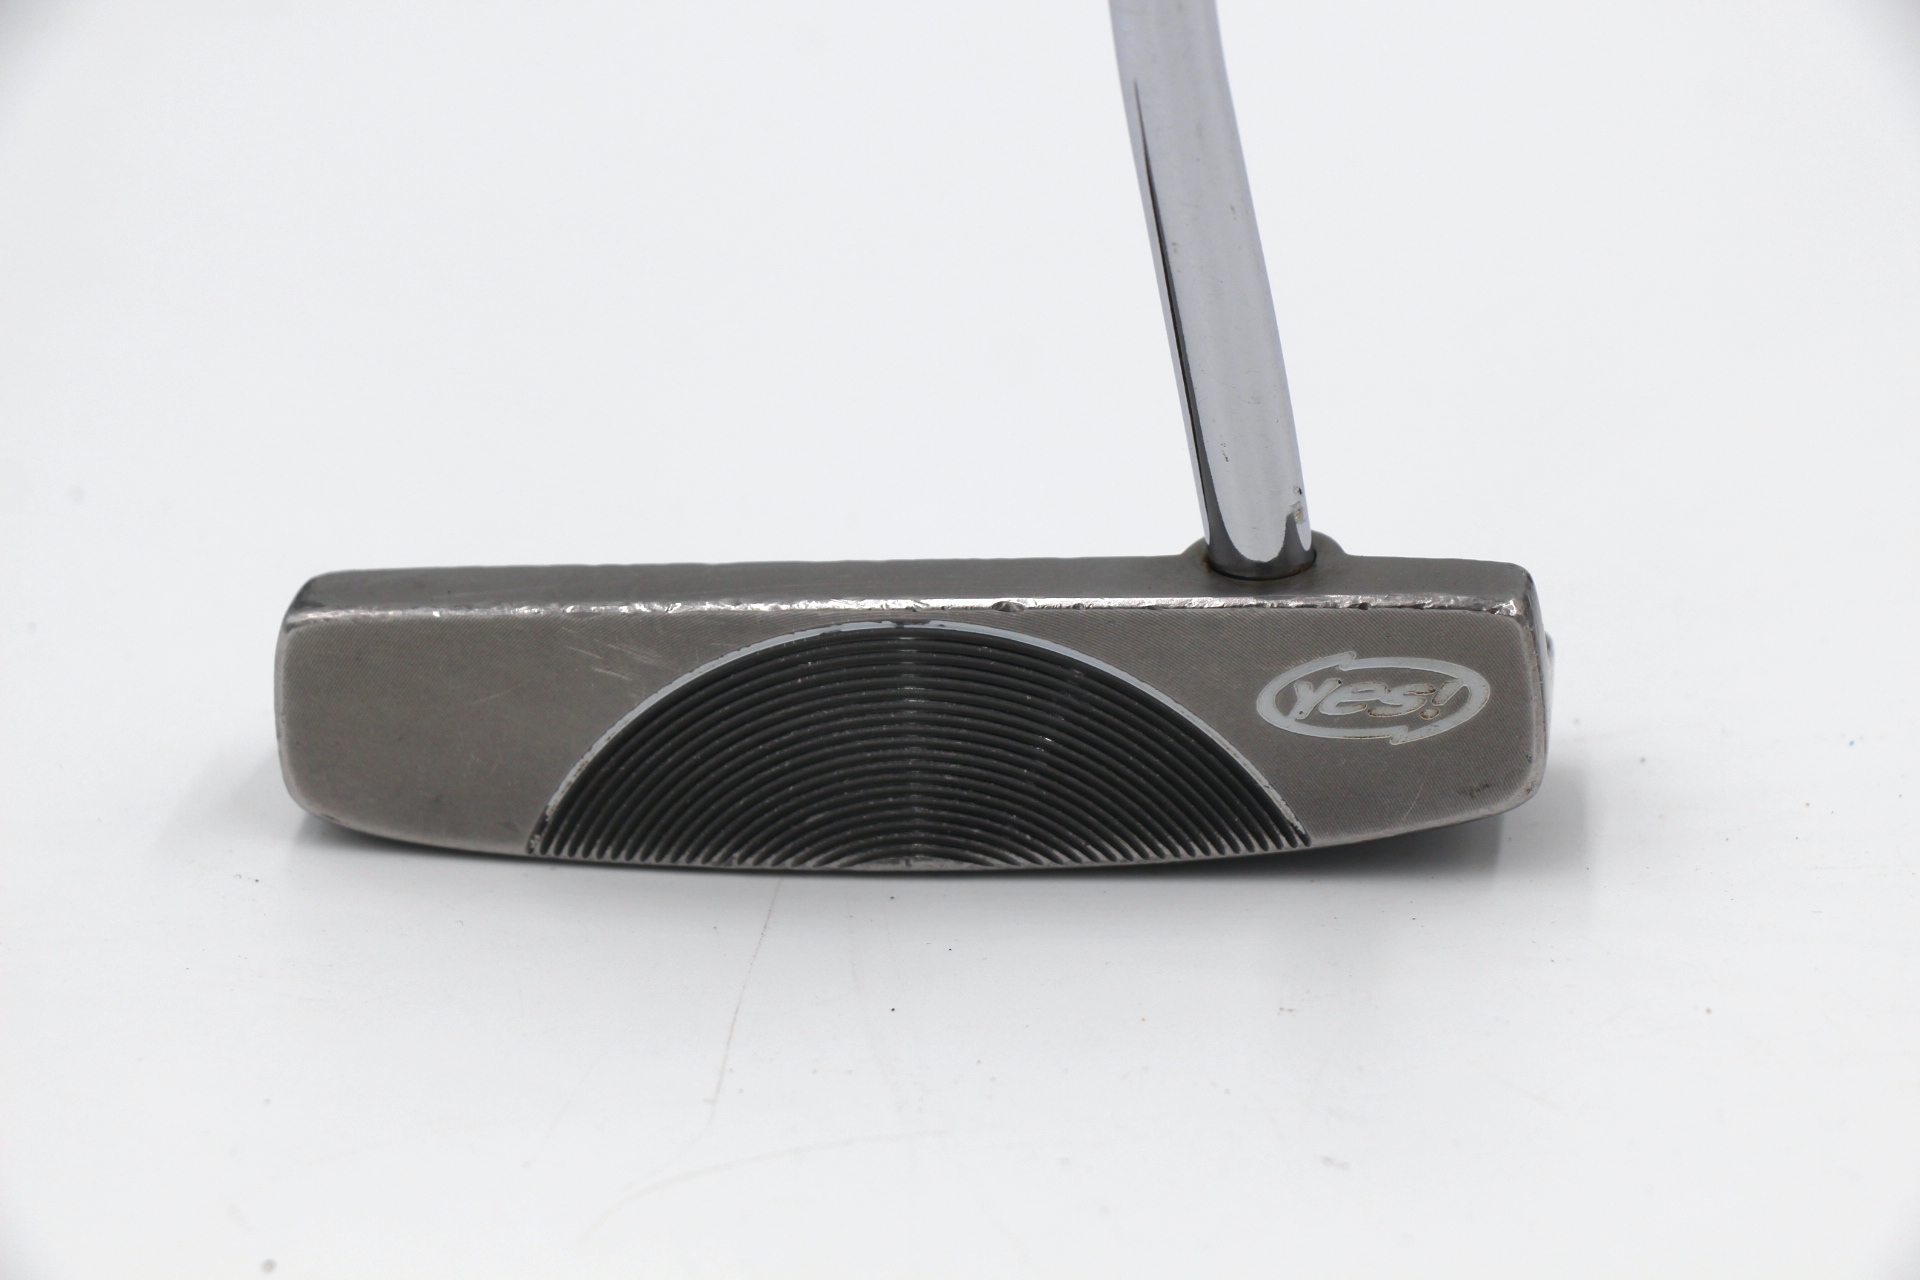 Yes! C-Groove Tracy Putter